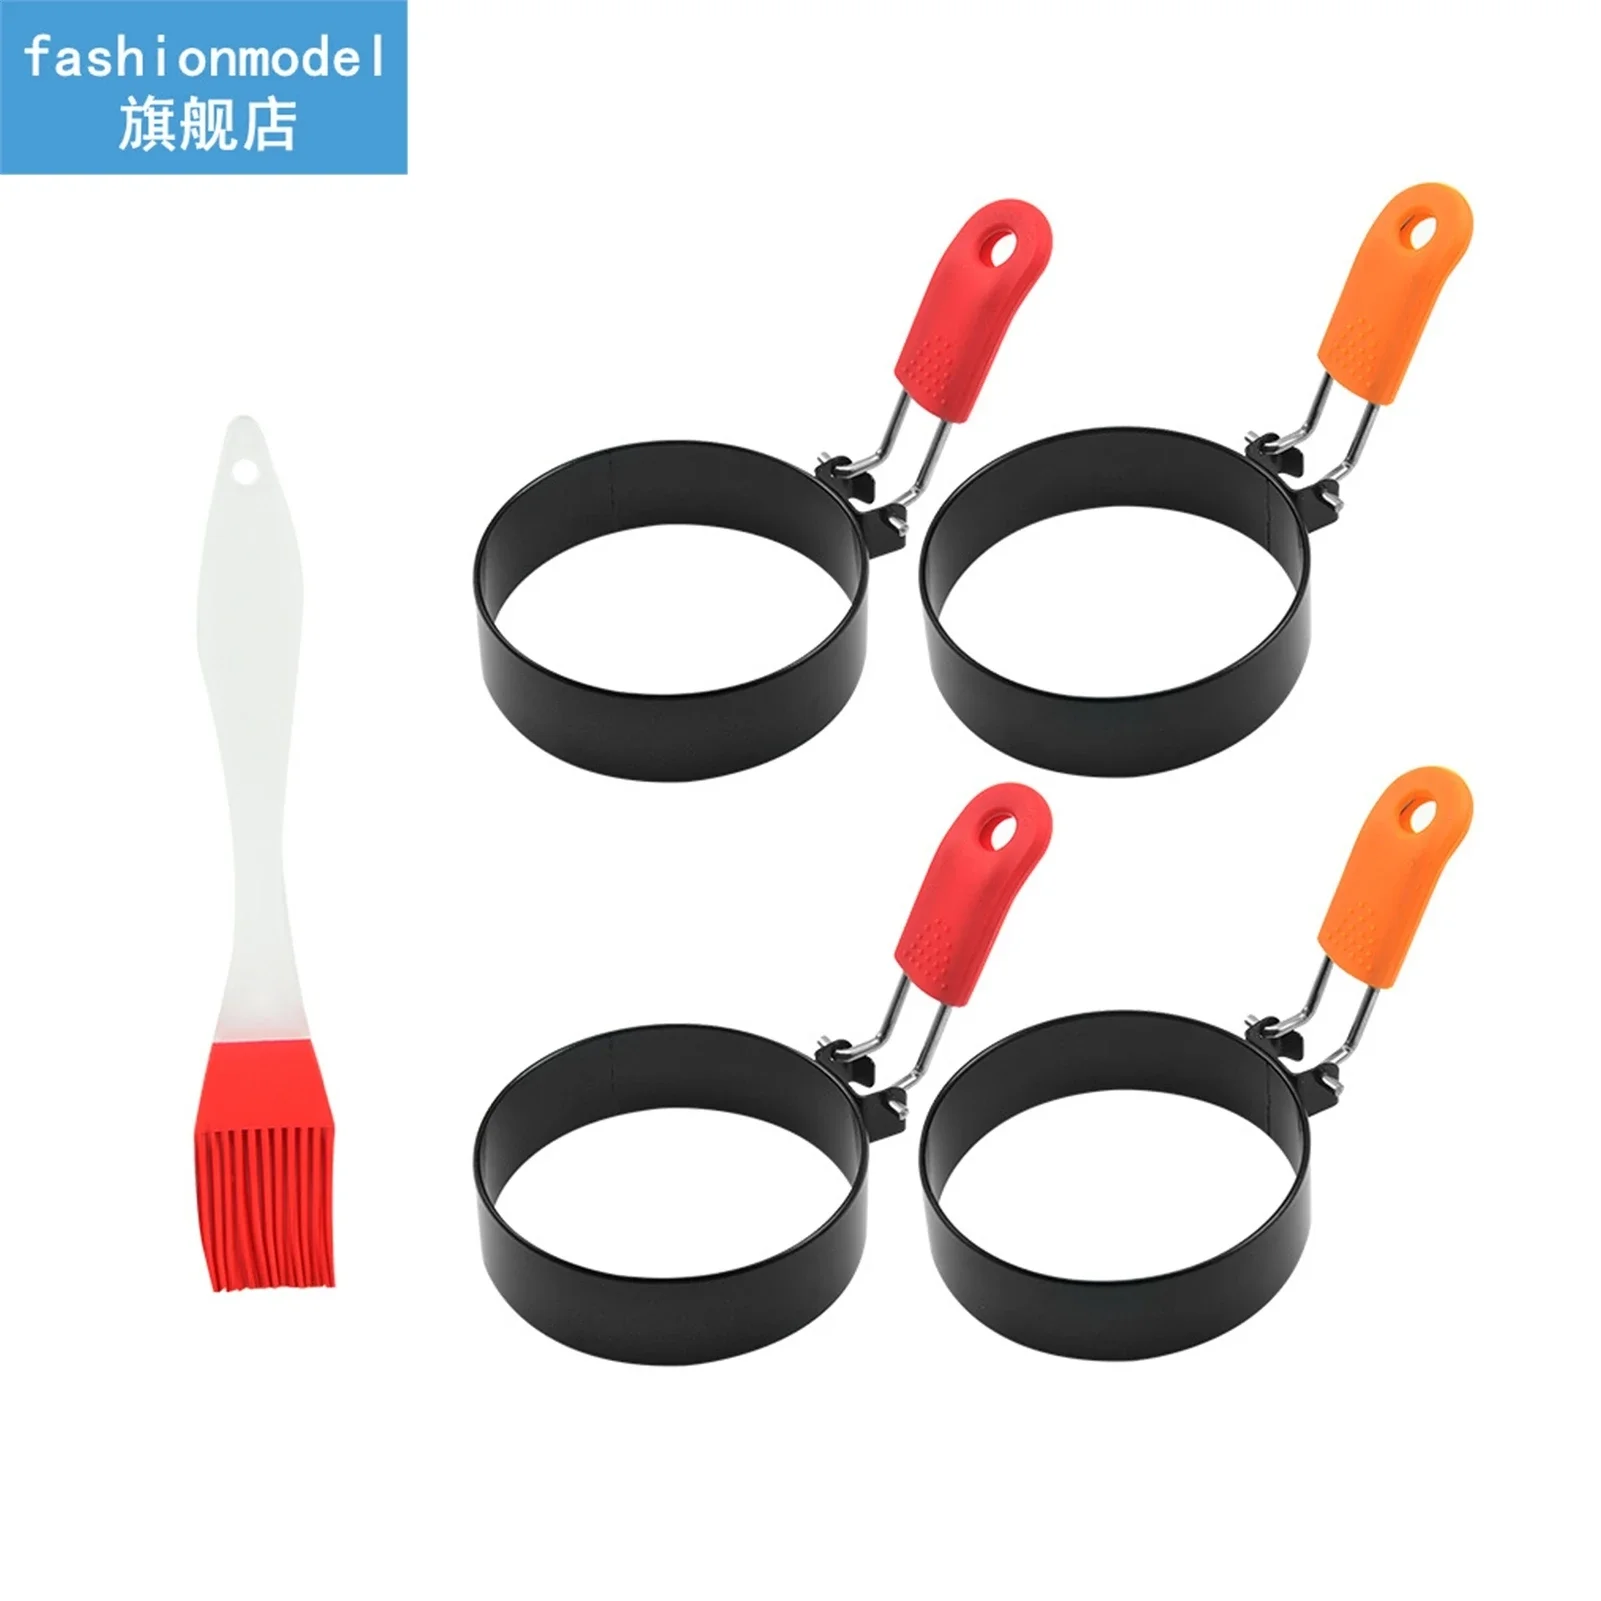 4 PCS/SET Muffins Với Silicone Handle Kitchen Easy Clean OME